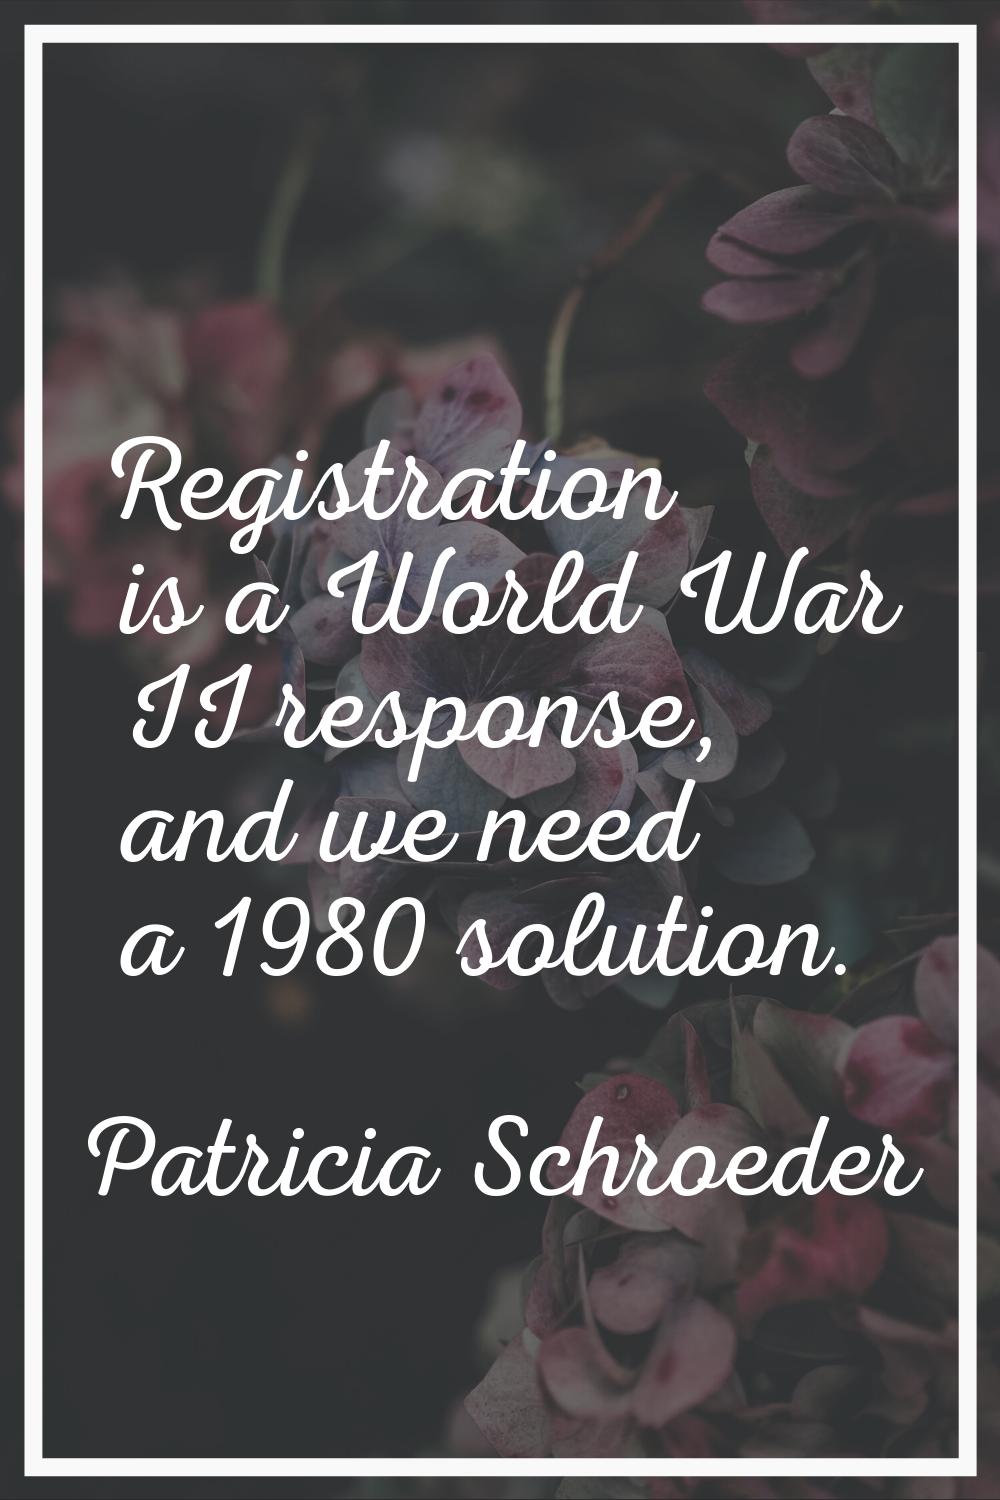 Registration is a World War II response, and we need a 1980 solution.